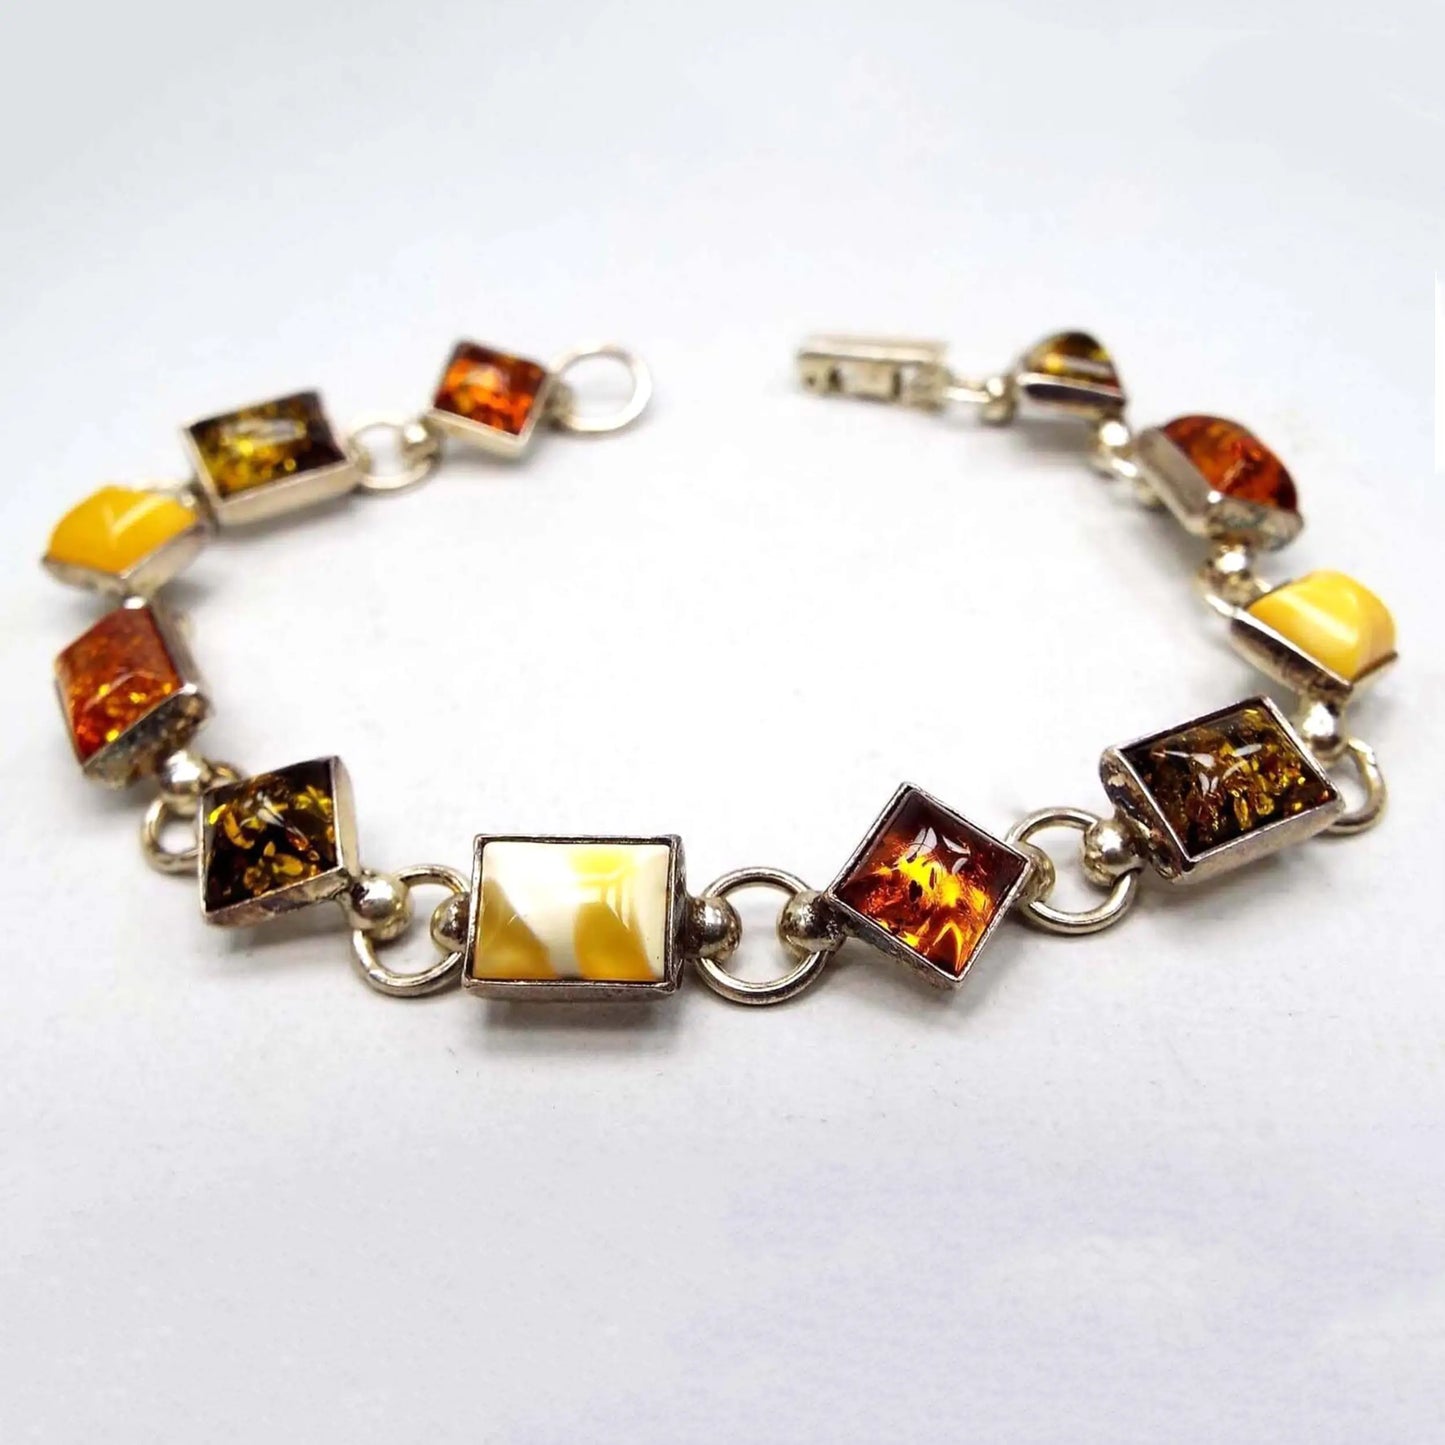 Top view of the Mid Century Baltic amber link bracelet. The setting is sterling silver and has alternating diamond shaped and rectangle shaped links. Each link has an amber cab. The amber has alternating colors of dark orange, olive green, and a yellow amber that is a marbled light to dark yellow color. There is a snap lock clasp on the end.